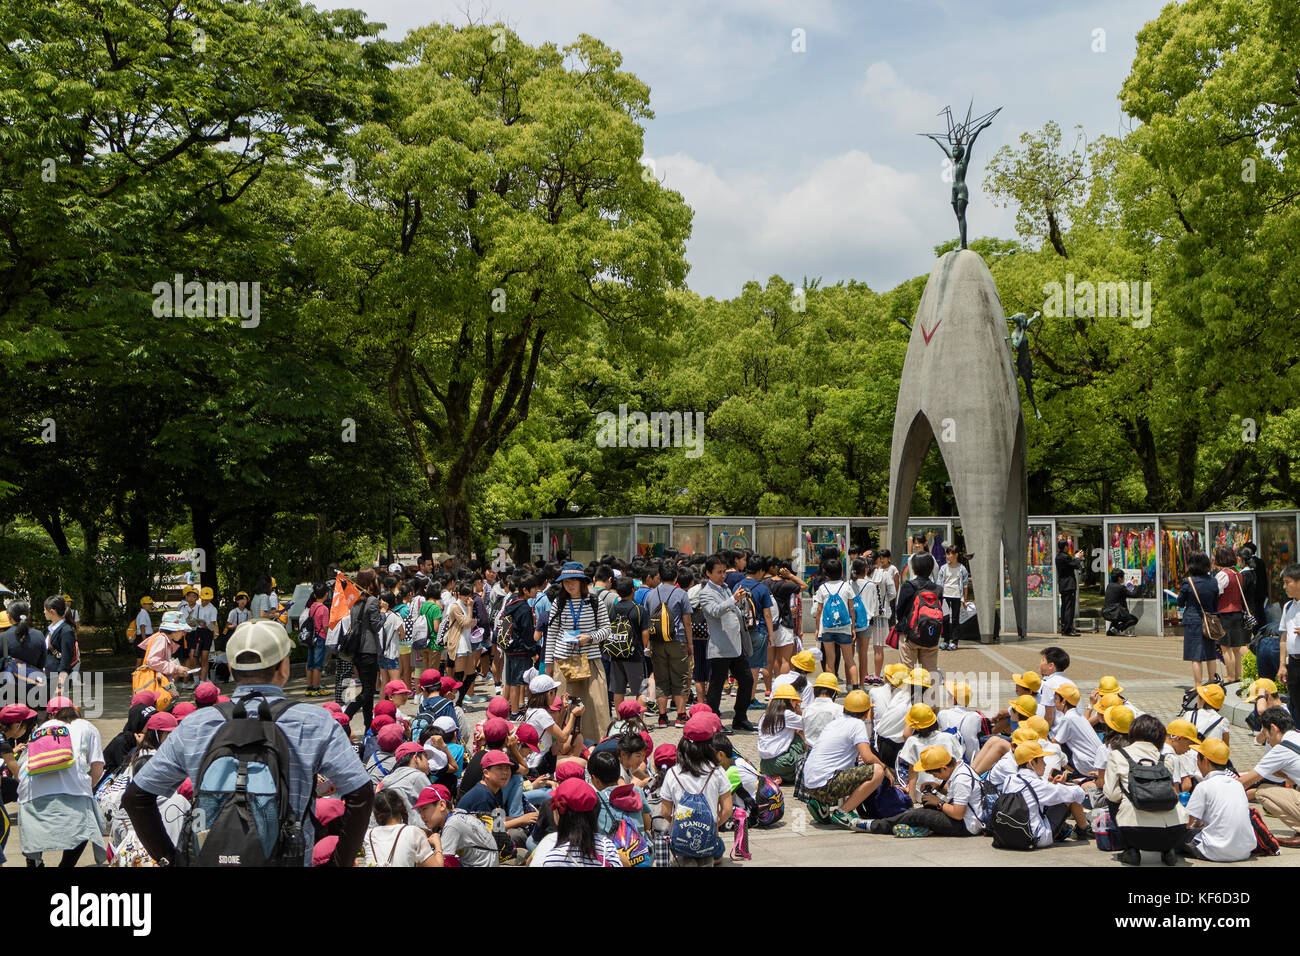 Hiroshima, Japan - May 25, 2017: Students gathering at the Children's Peace Monument in memory of atomic bombing victims Stock Photo